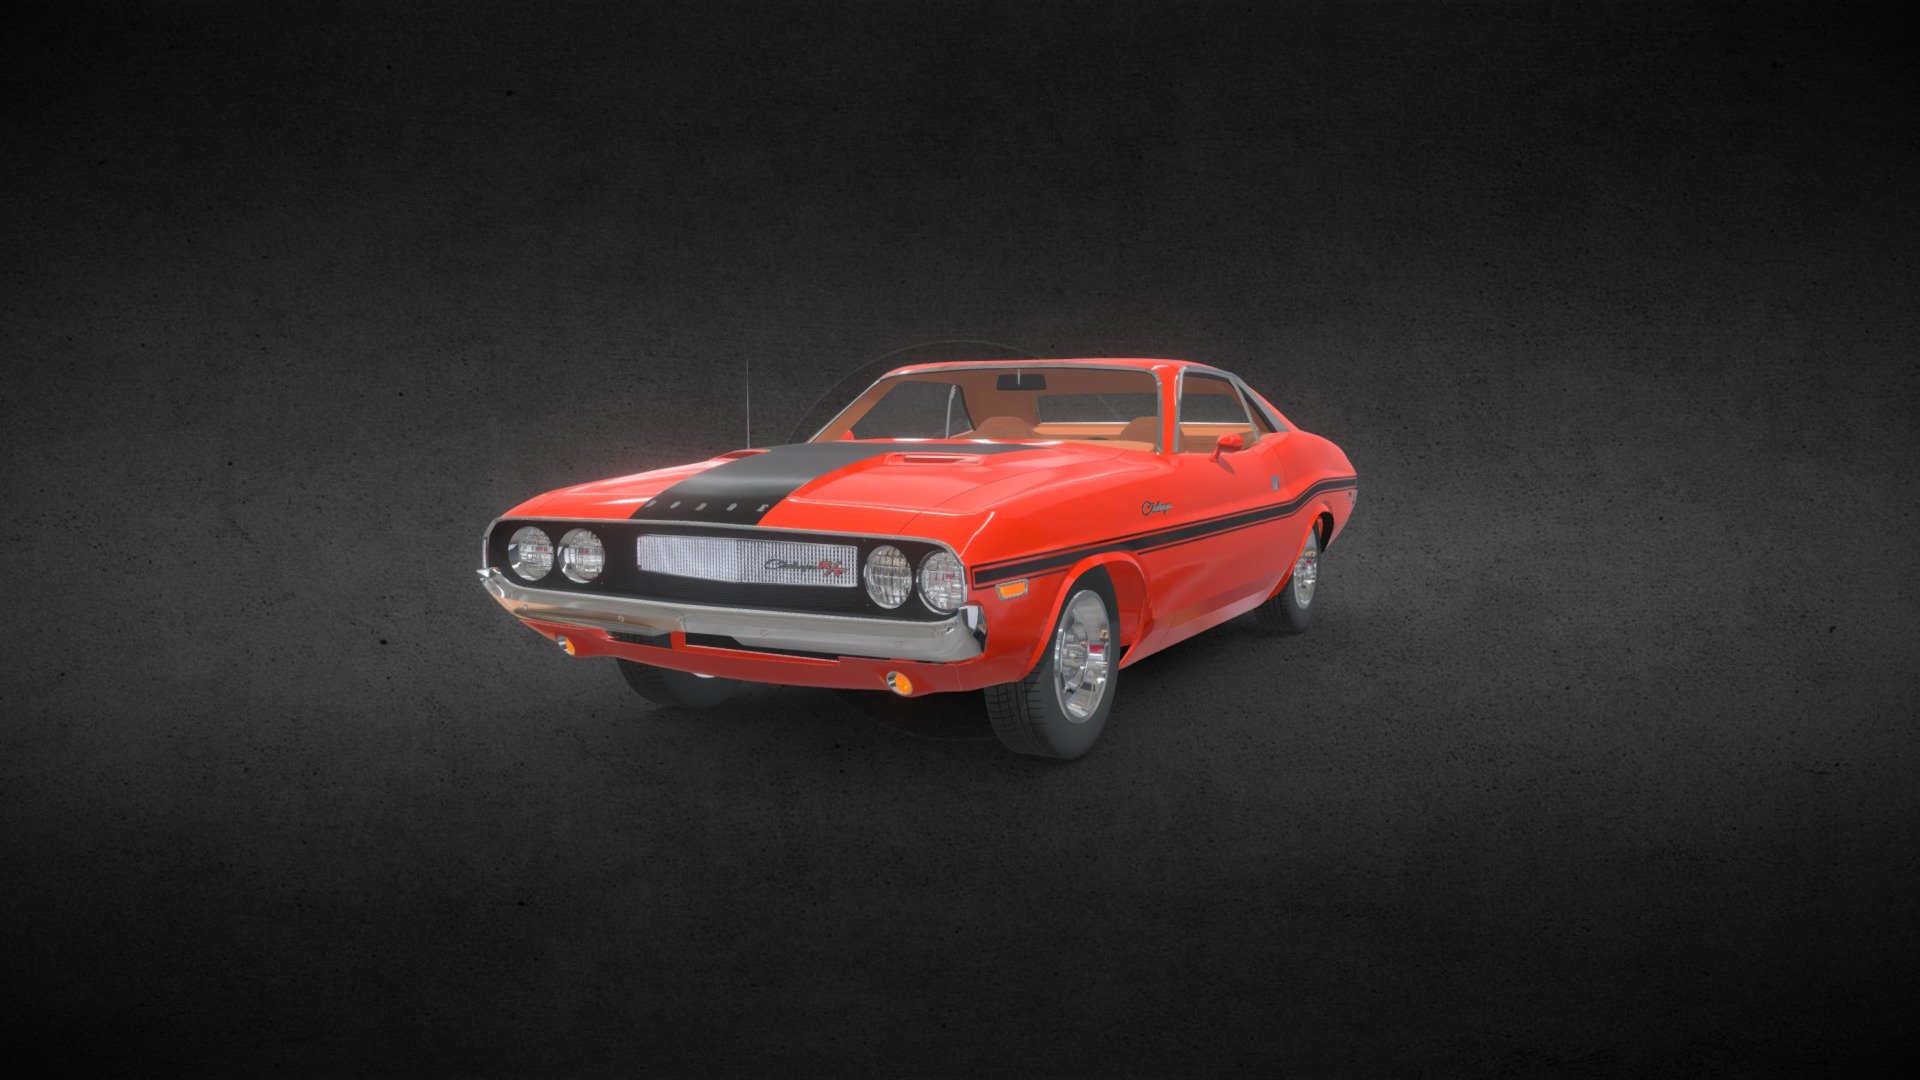 A 3D model of Dodge Challenger R/T from 1970. Too bad, emblems crashed after upload :/

Created in Blender 2.83. Some textures created in Inkscape.

Interior and chassis are simplified.

I hope you'd like it :) - Dodge Challenger RT (1970) - 3D model by KrStolorz (Krzysztof Stolorz) (@KrStolorz) 3d model